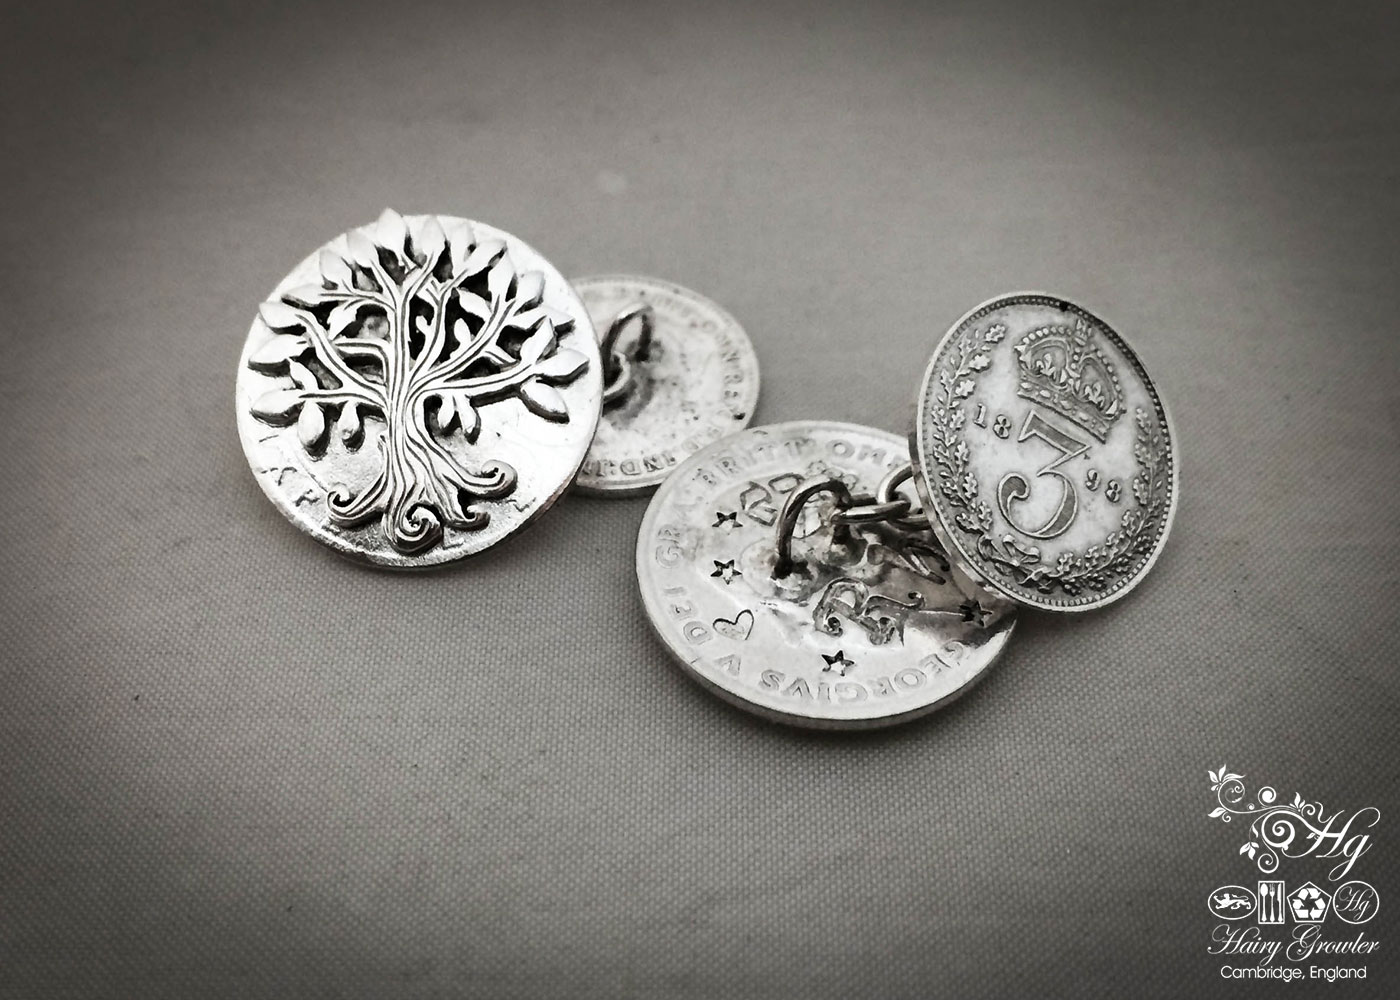 Hairy Growler Jewellery - Silver Tree collection. Tree cufflinks handcrafted and recycled from sterling silver sixpence and threepence coins